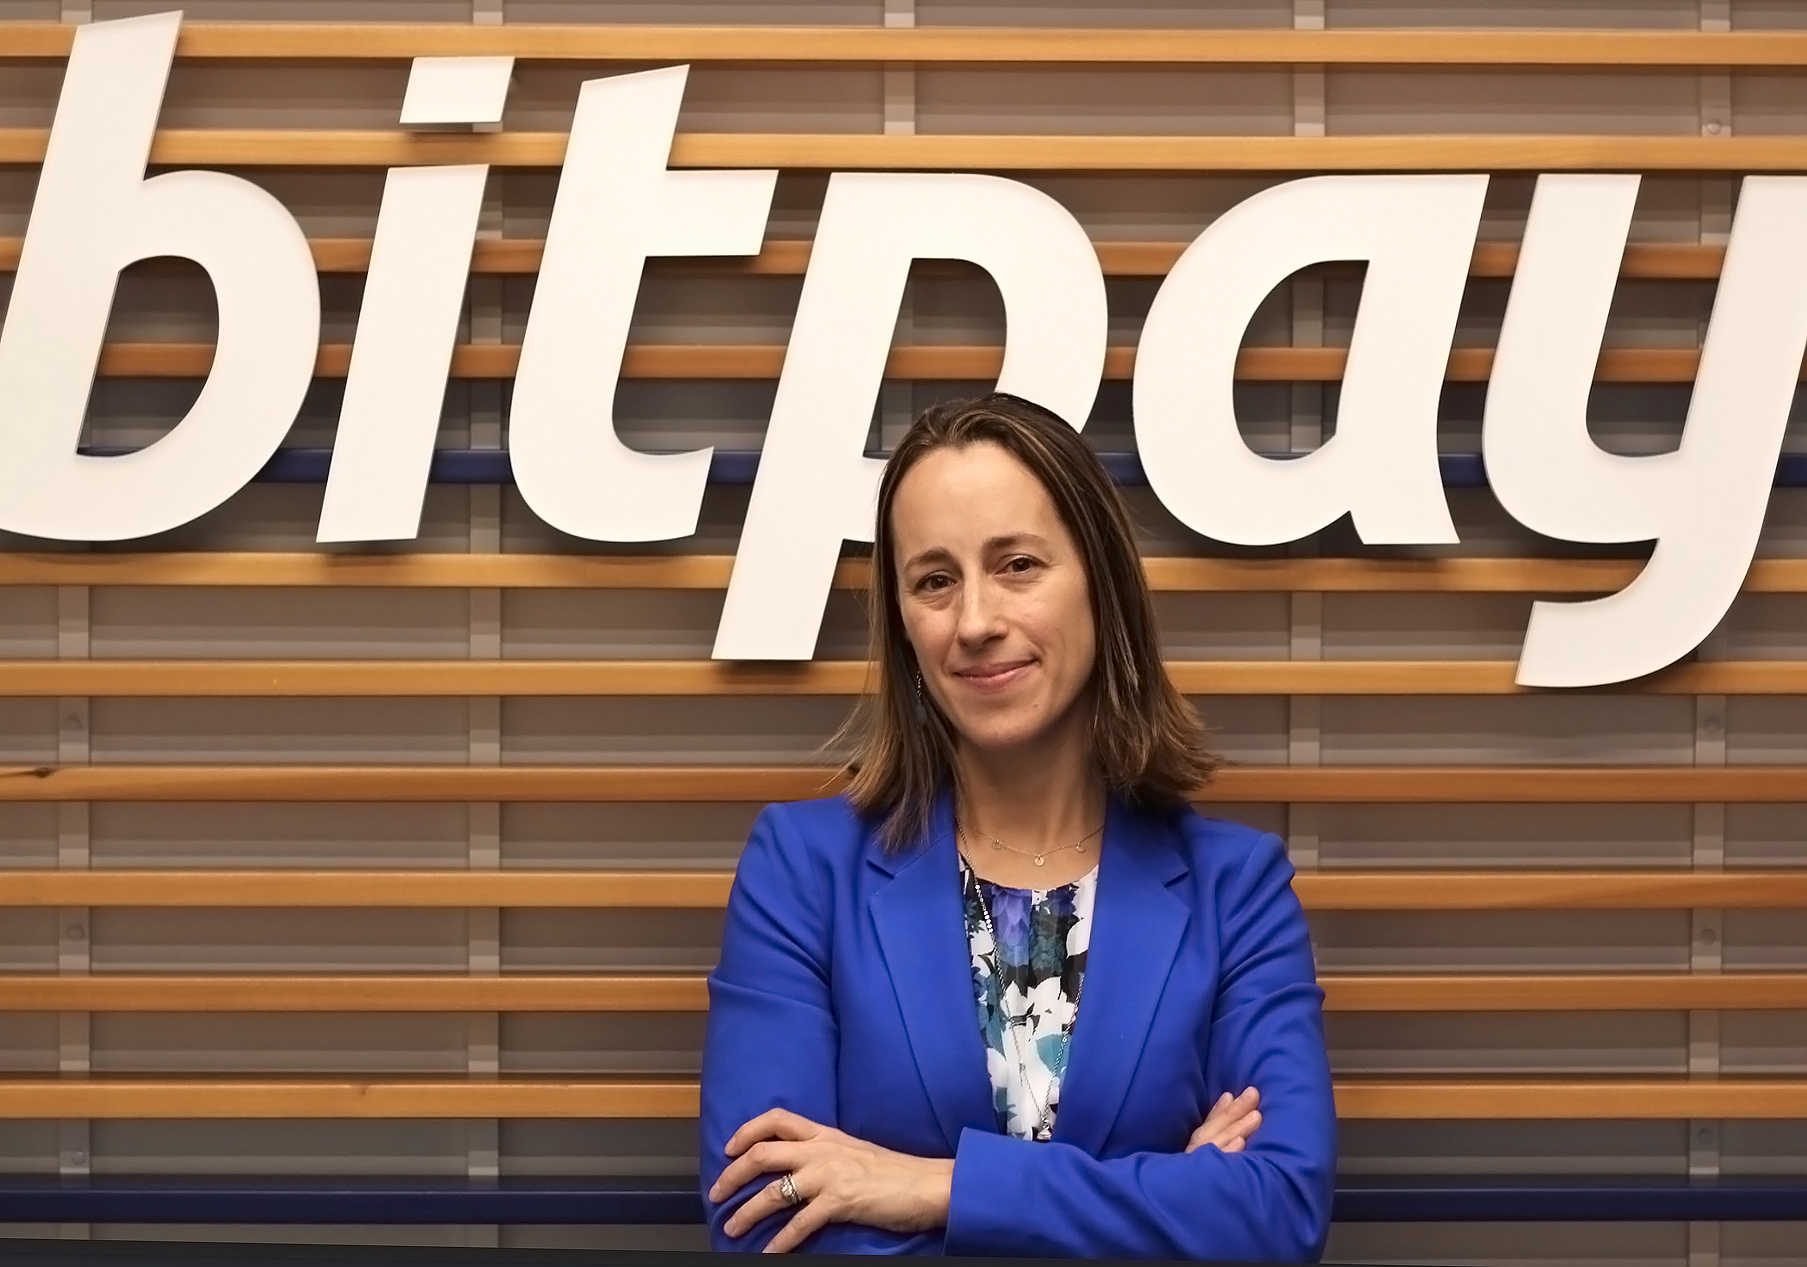 Eden Doniger joins BitPay as General Counsel and Chief Compliance Officer